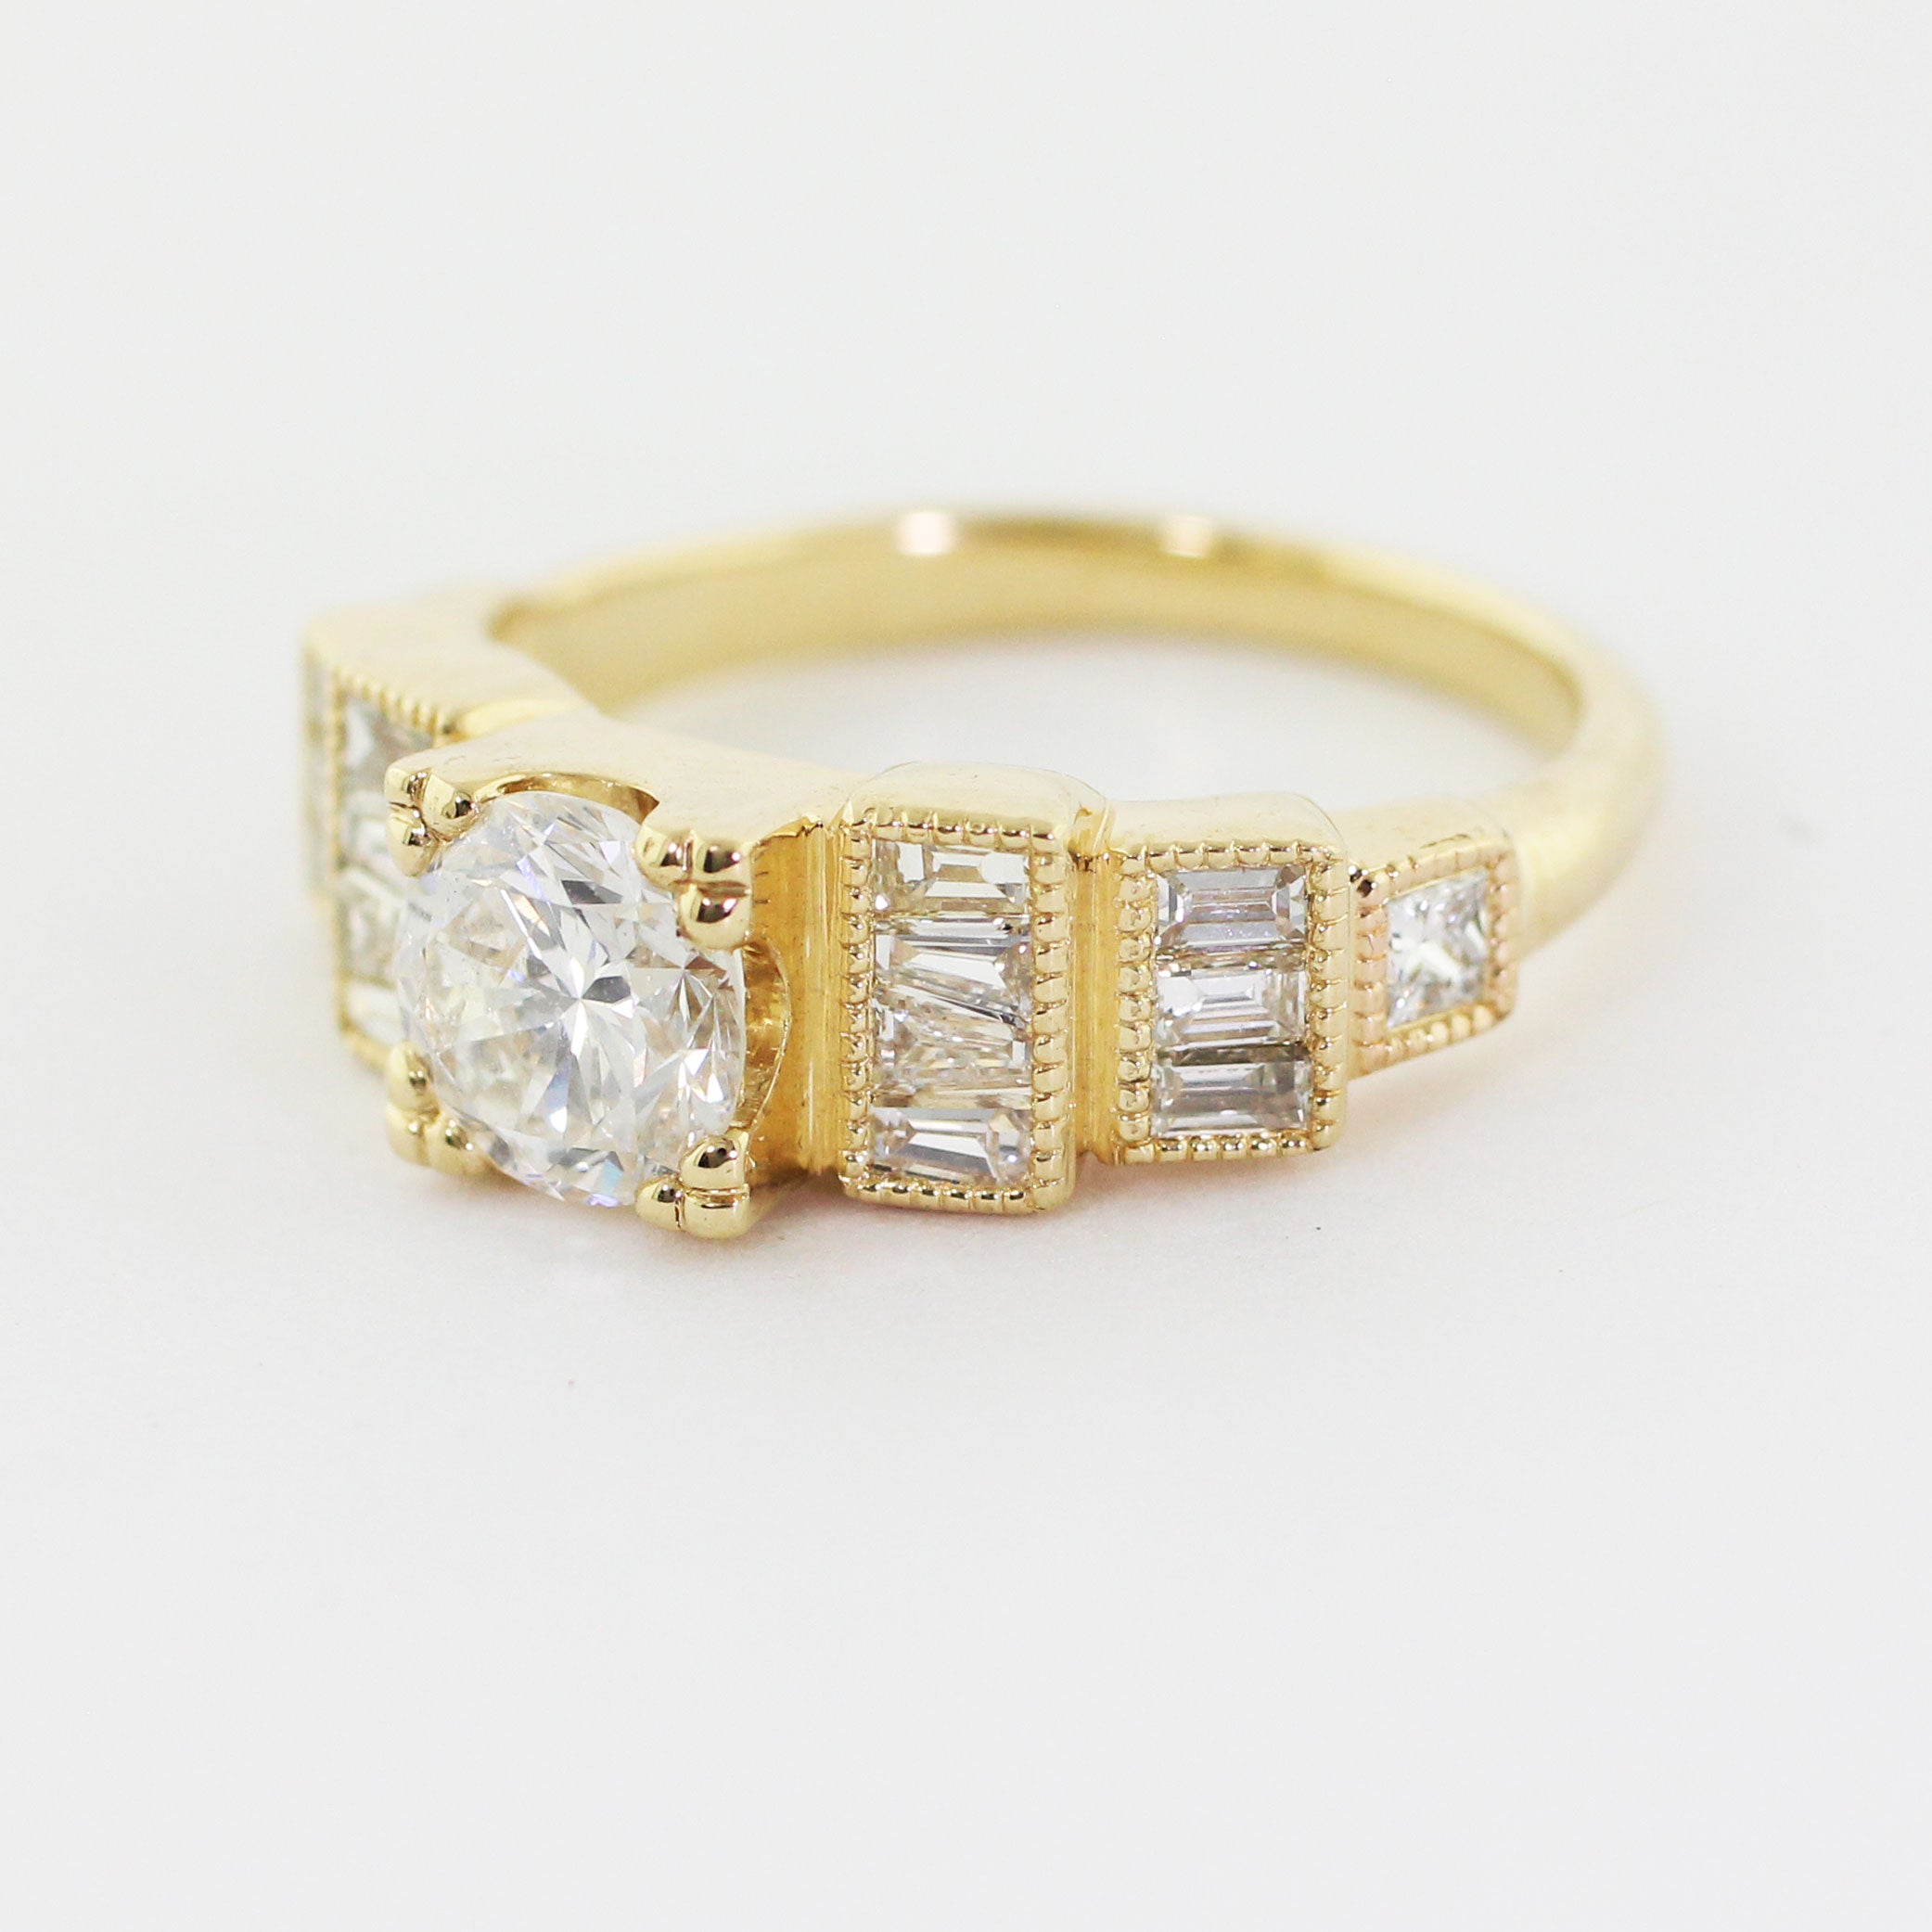 Custom 14k yellow gold Art Deco engagement ring with a prong-set center diamond and a series of heirloom diamonds channel-set along the band in a step-down pattern